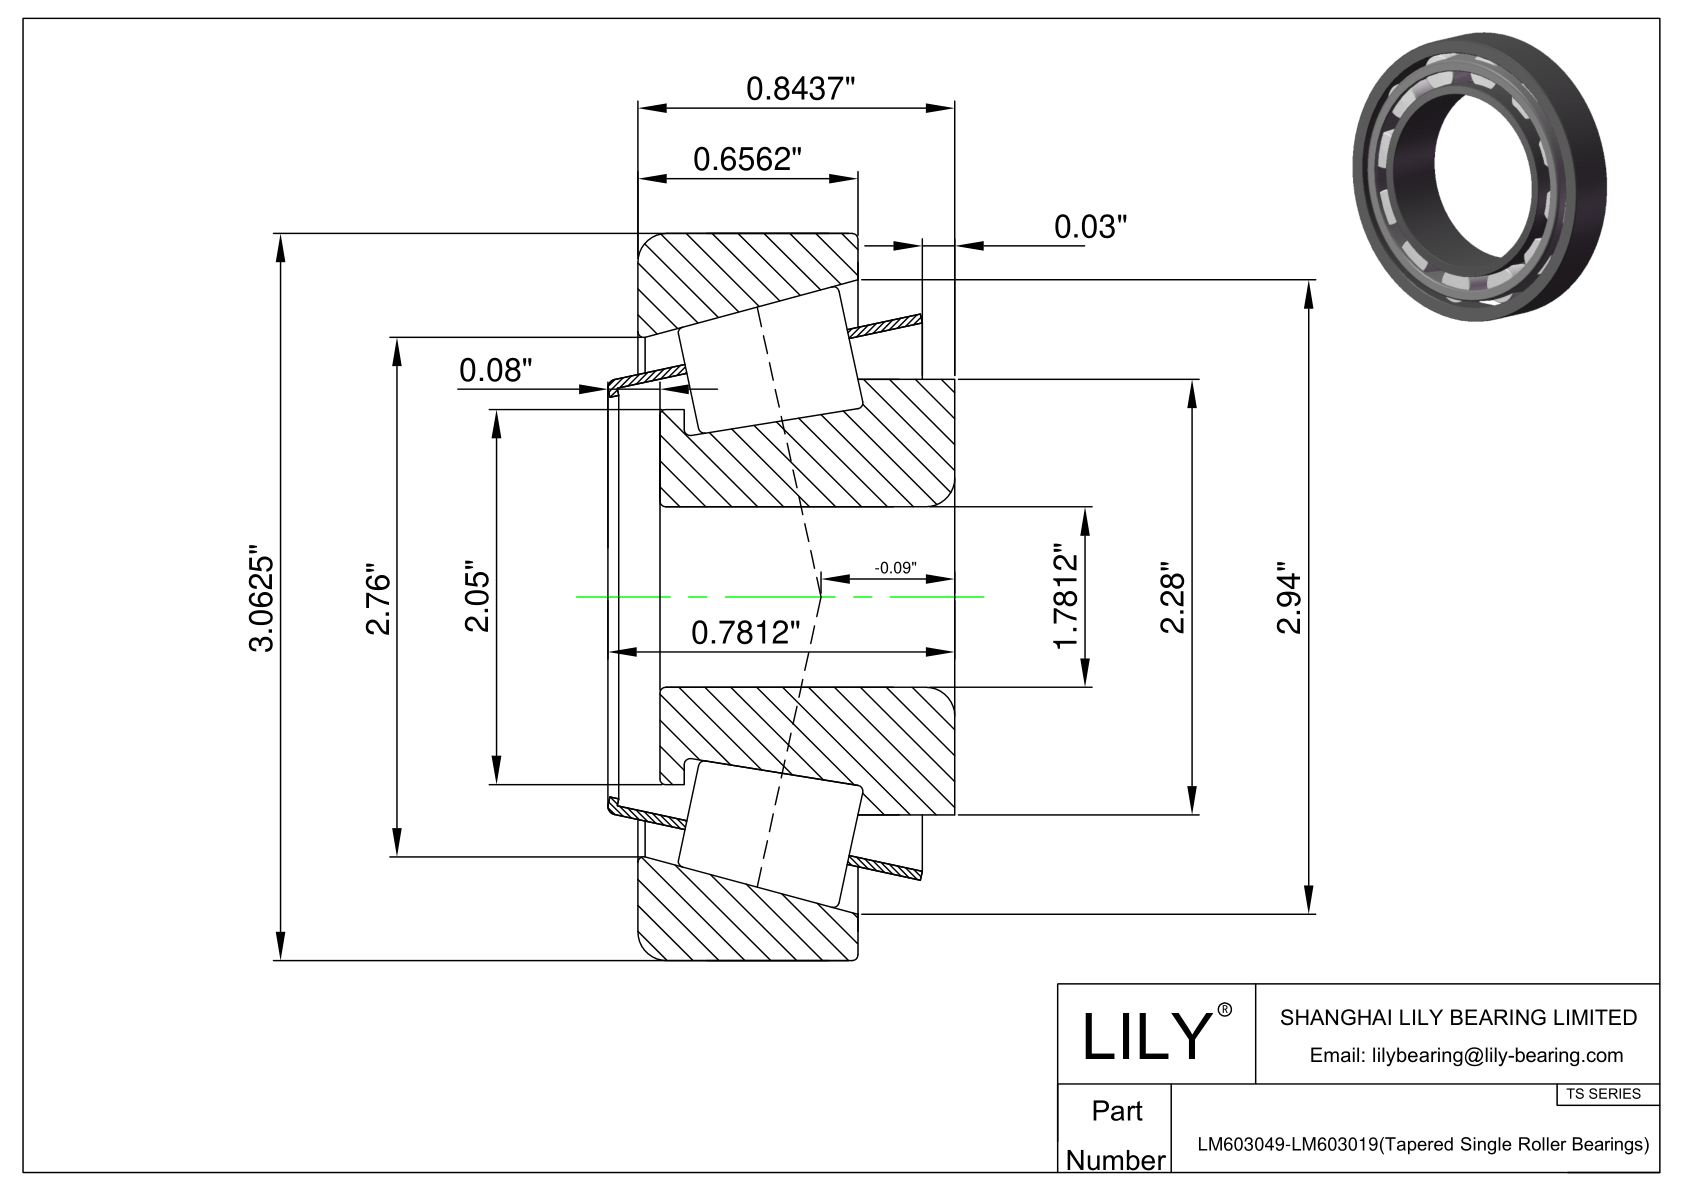 LM603049-LM603019 TS (Tapered Single Roller Bearings) (Imperial) cad drawing